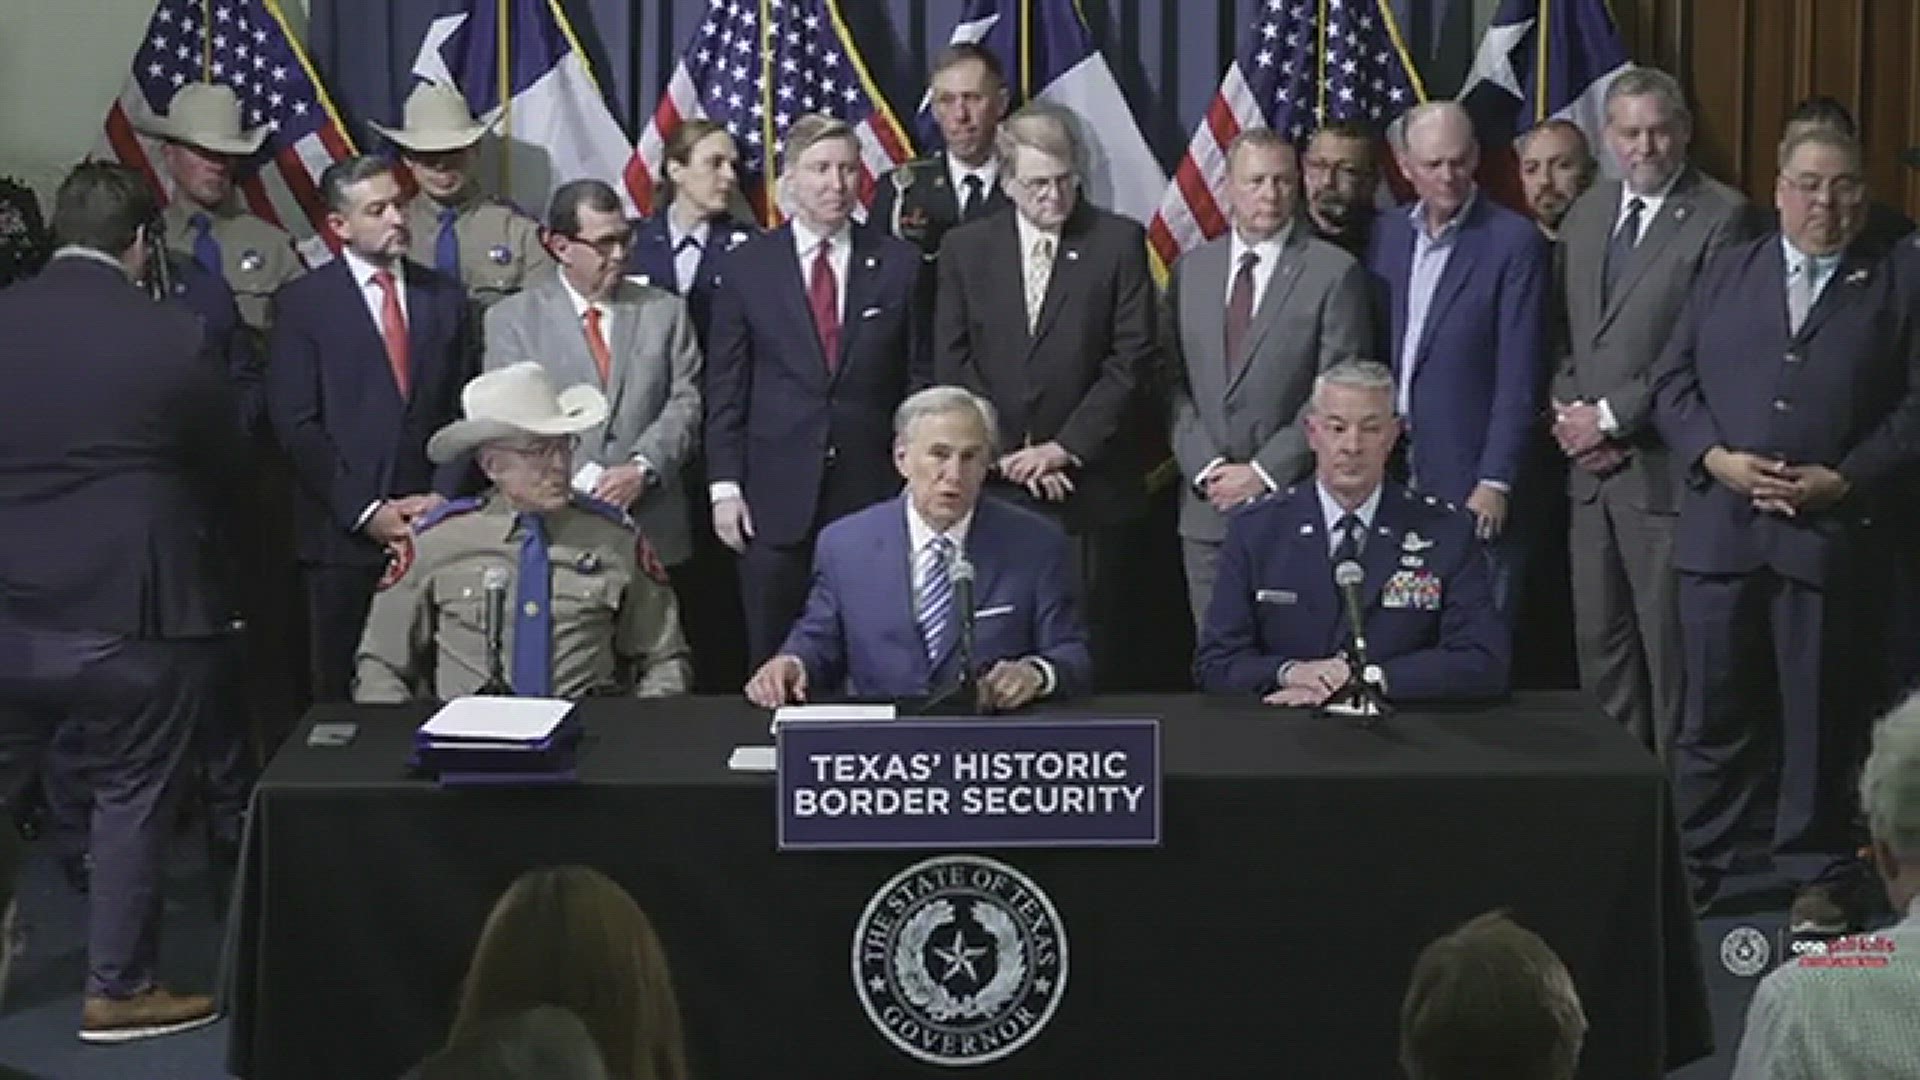 Gov. Abbott showed renderings of what the protection devices look like and says they're starting to be employed immediately